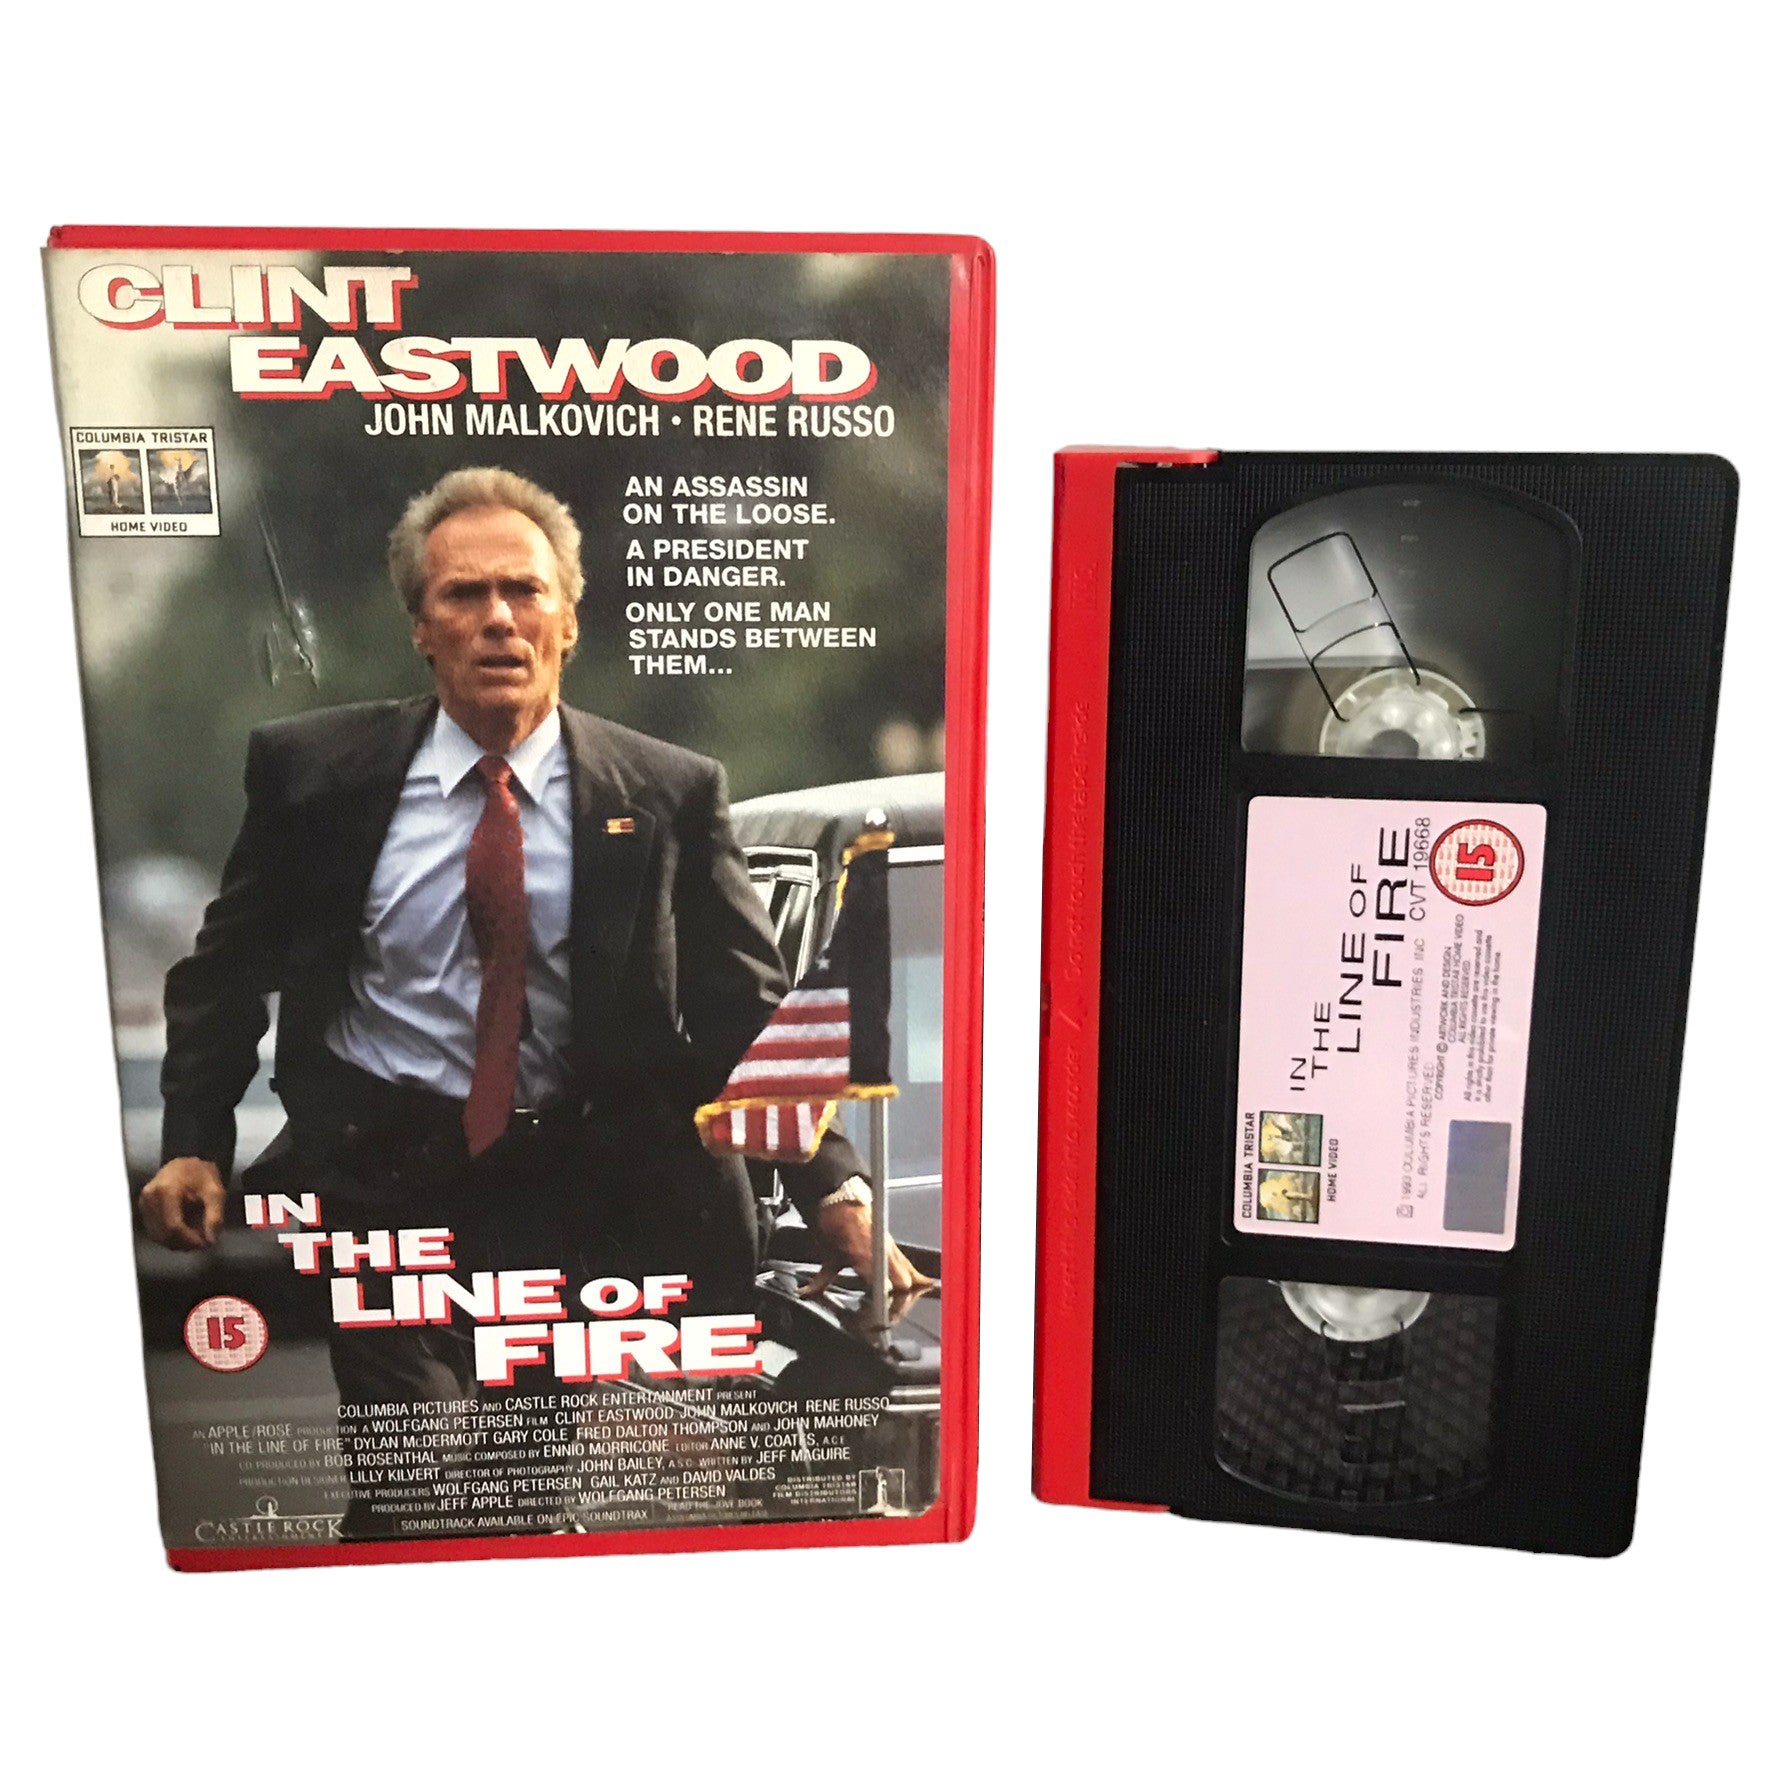 In The Lines of Fire - Client Eastwood - Columbia Tristar Home Video - Large Box - Pal - VHS-